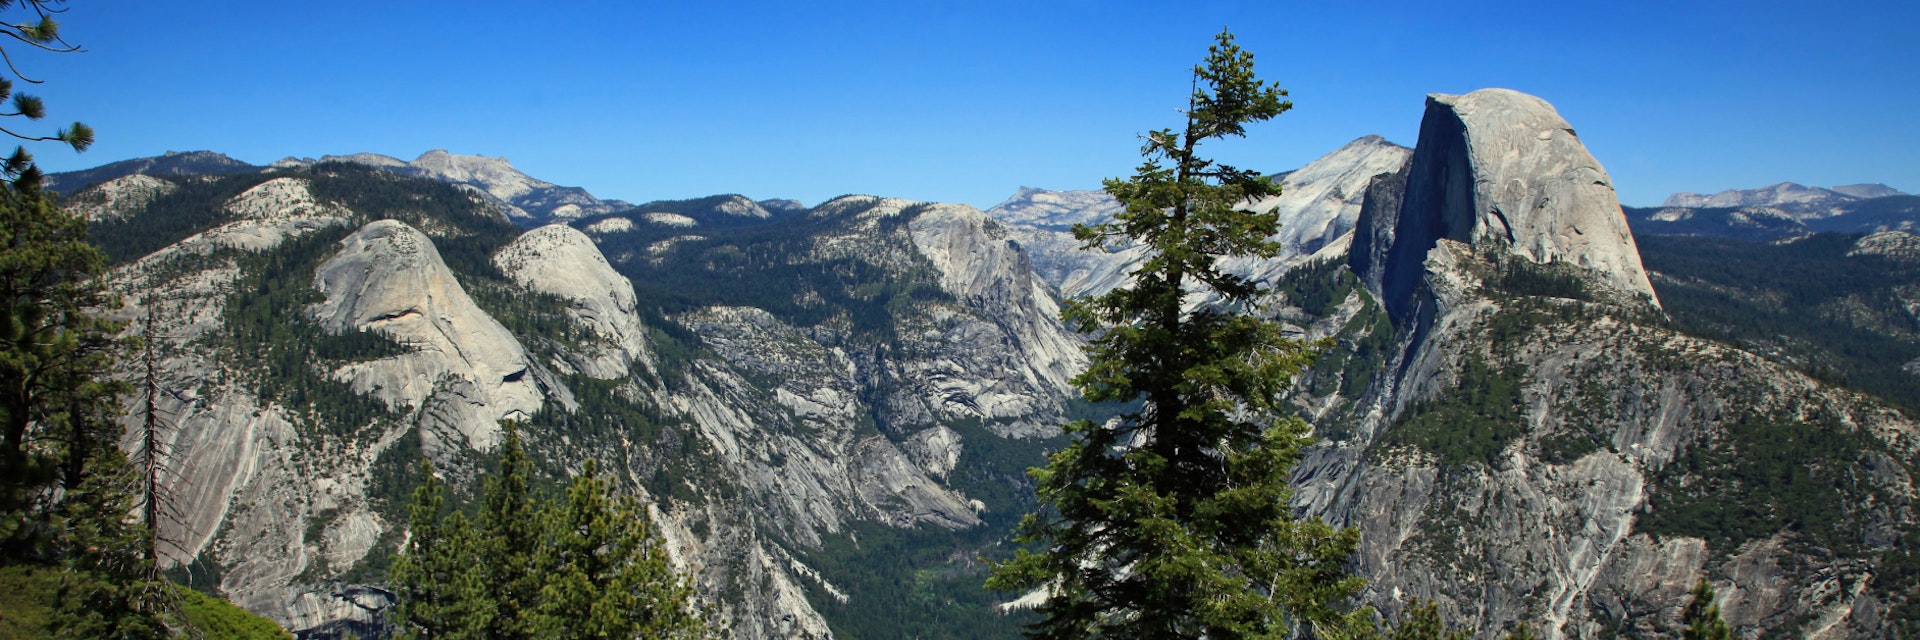 Half Dome and the Yosemite Valley viewed from Glacier Point in Yosemite National Park